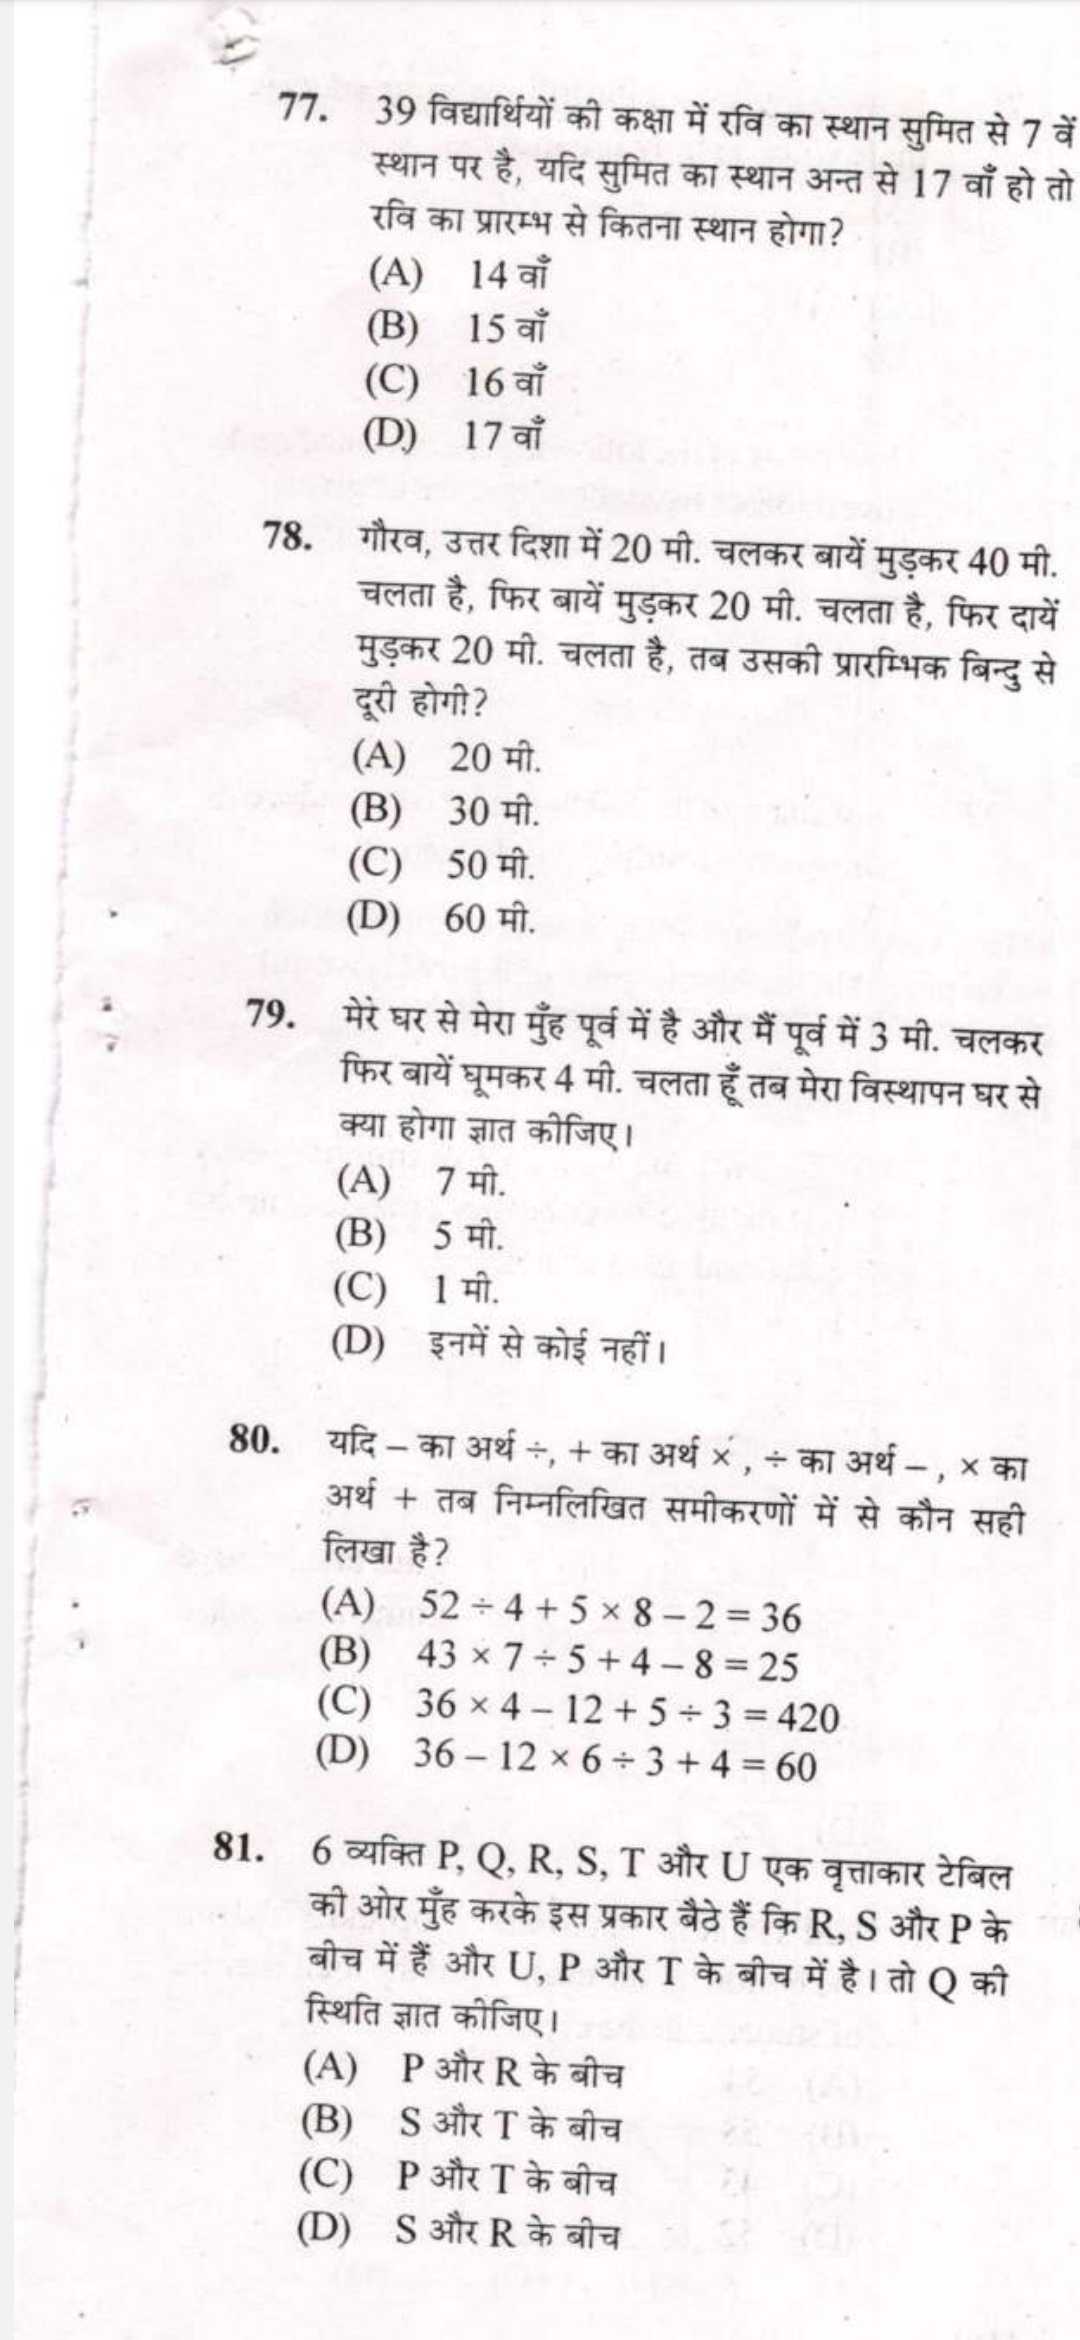 Reasoning questions 77 to 81